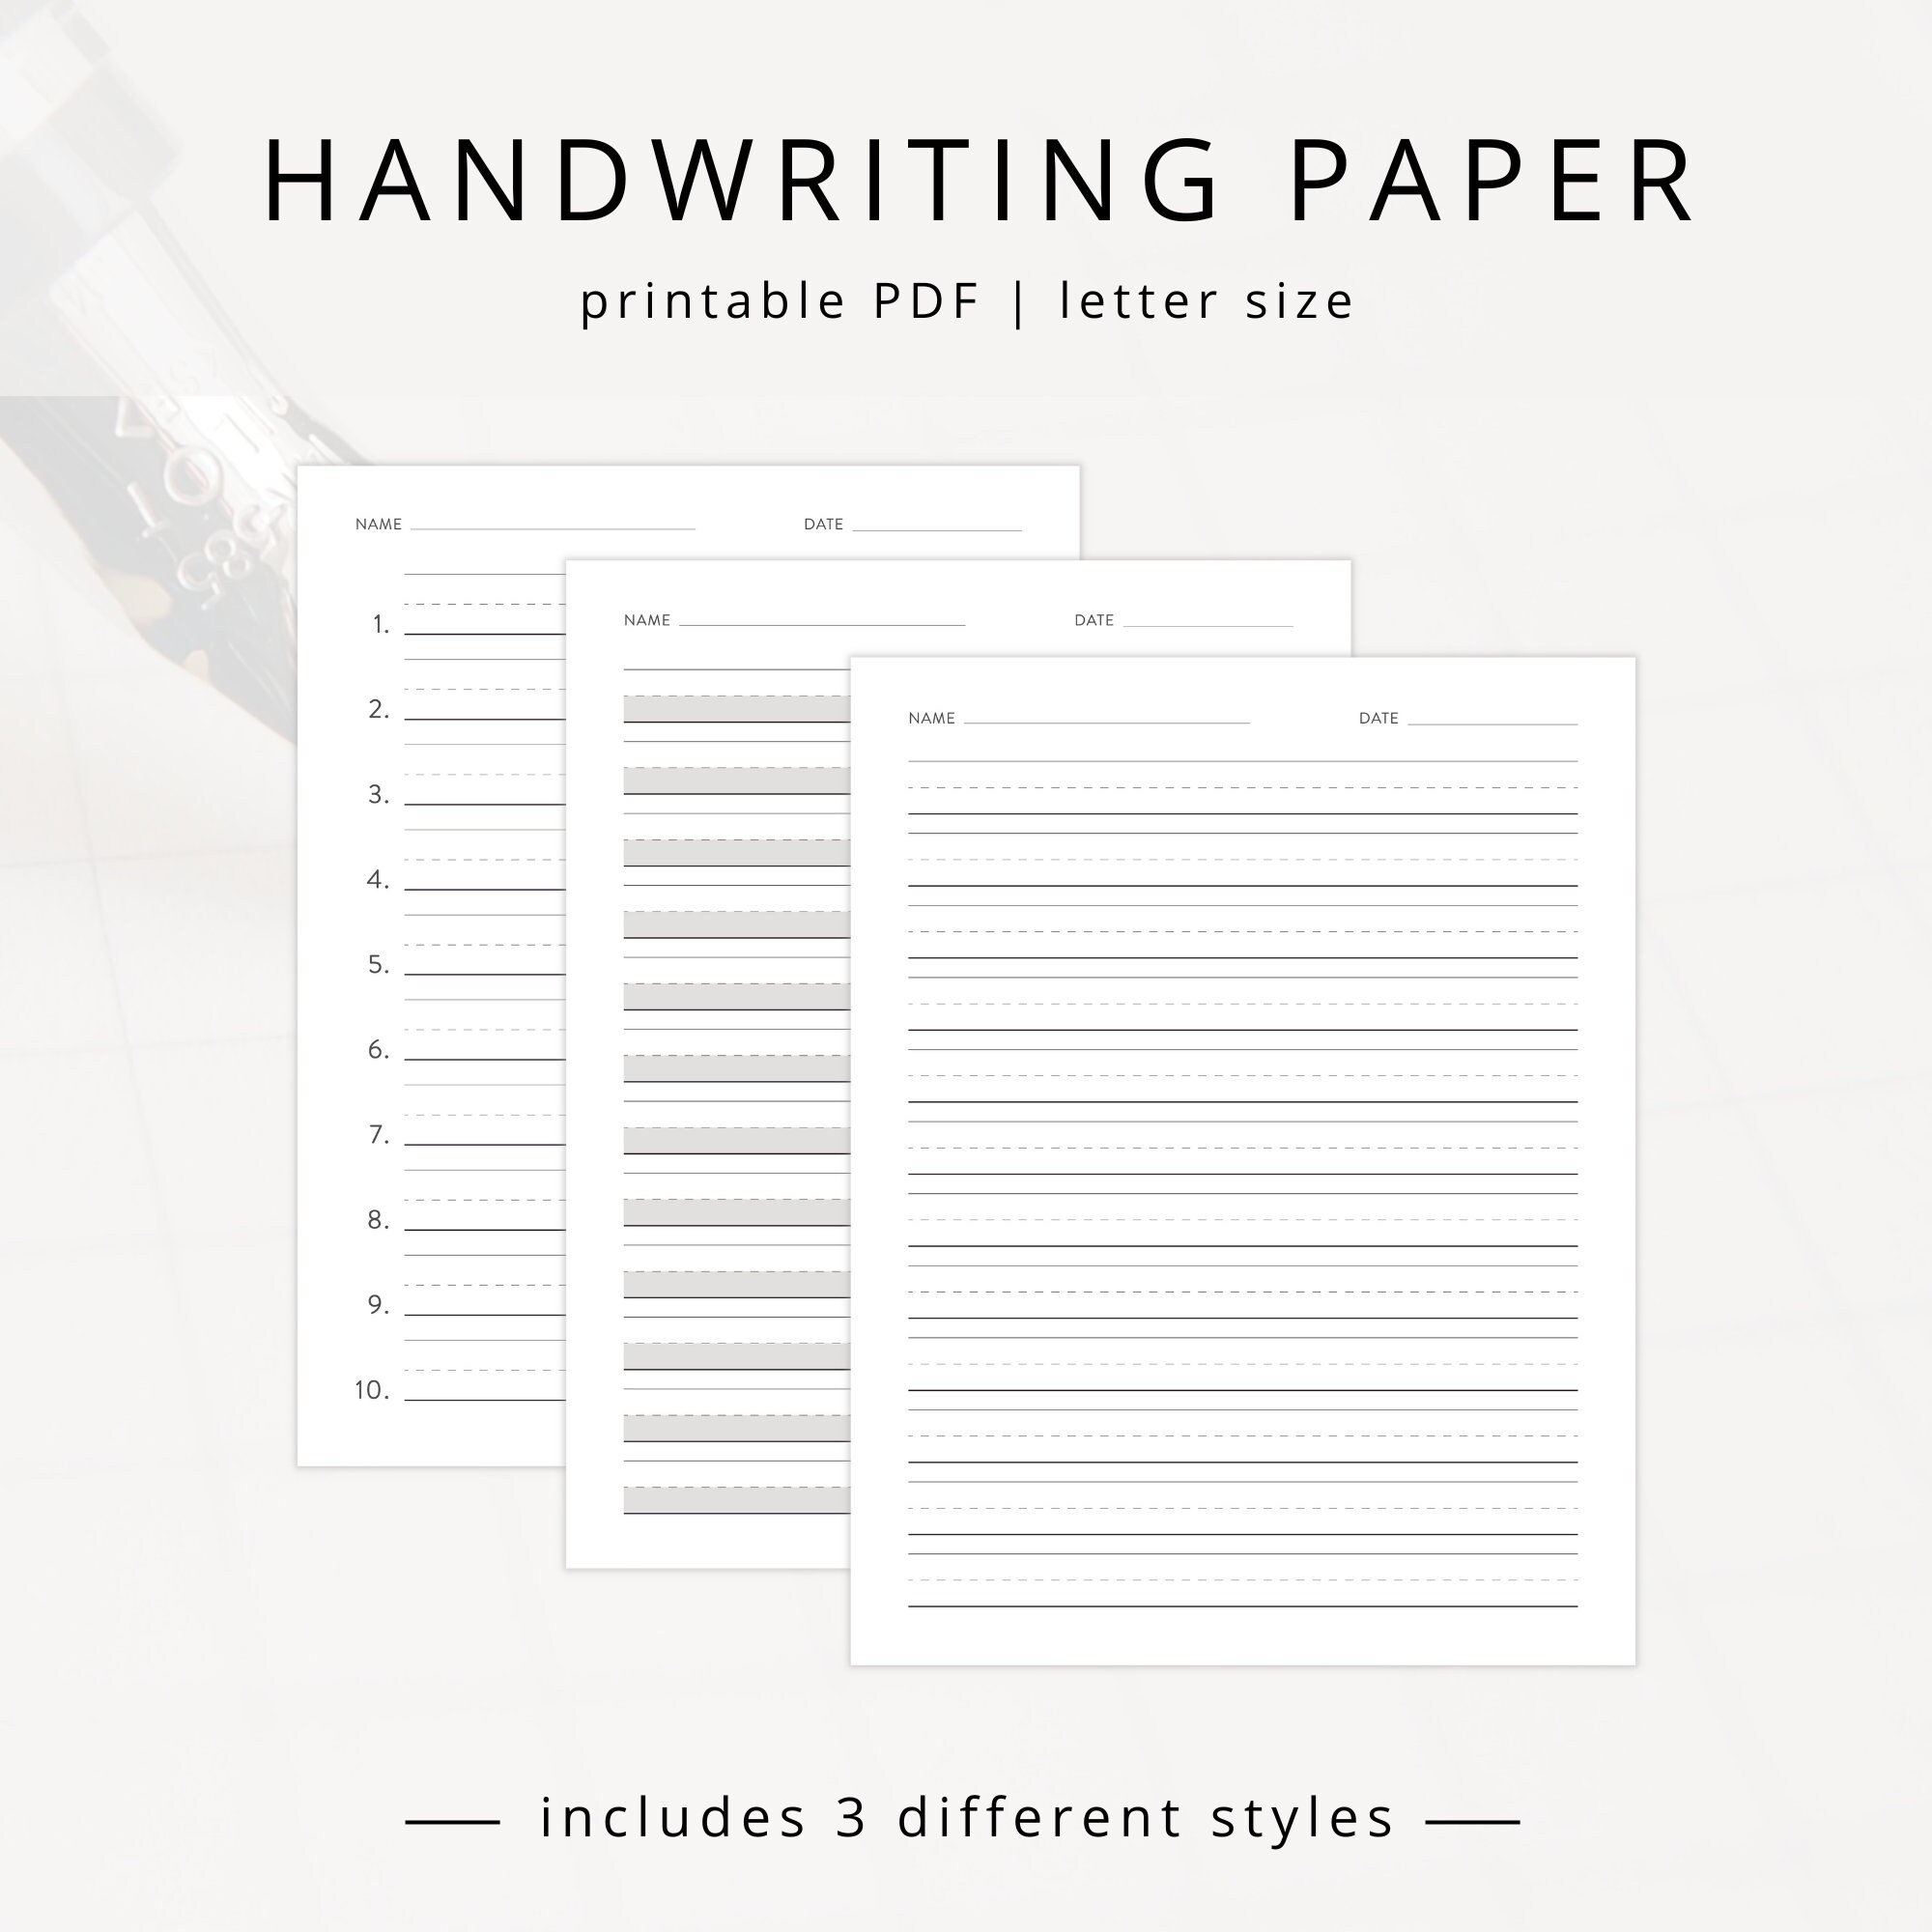 Handwriting Paper Printable Story Writing Paper Printable Elementary Home  Schoolong Printable Lined Paper Paper With Space to Draw 